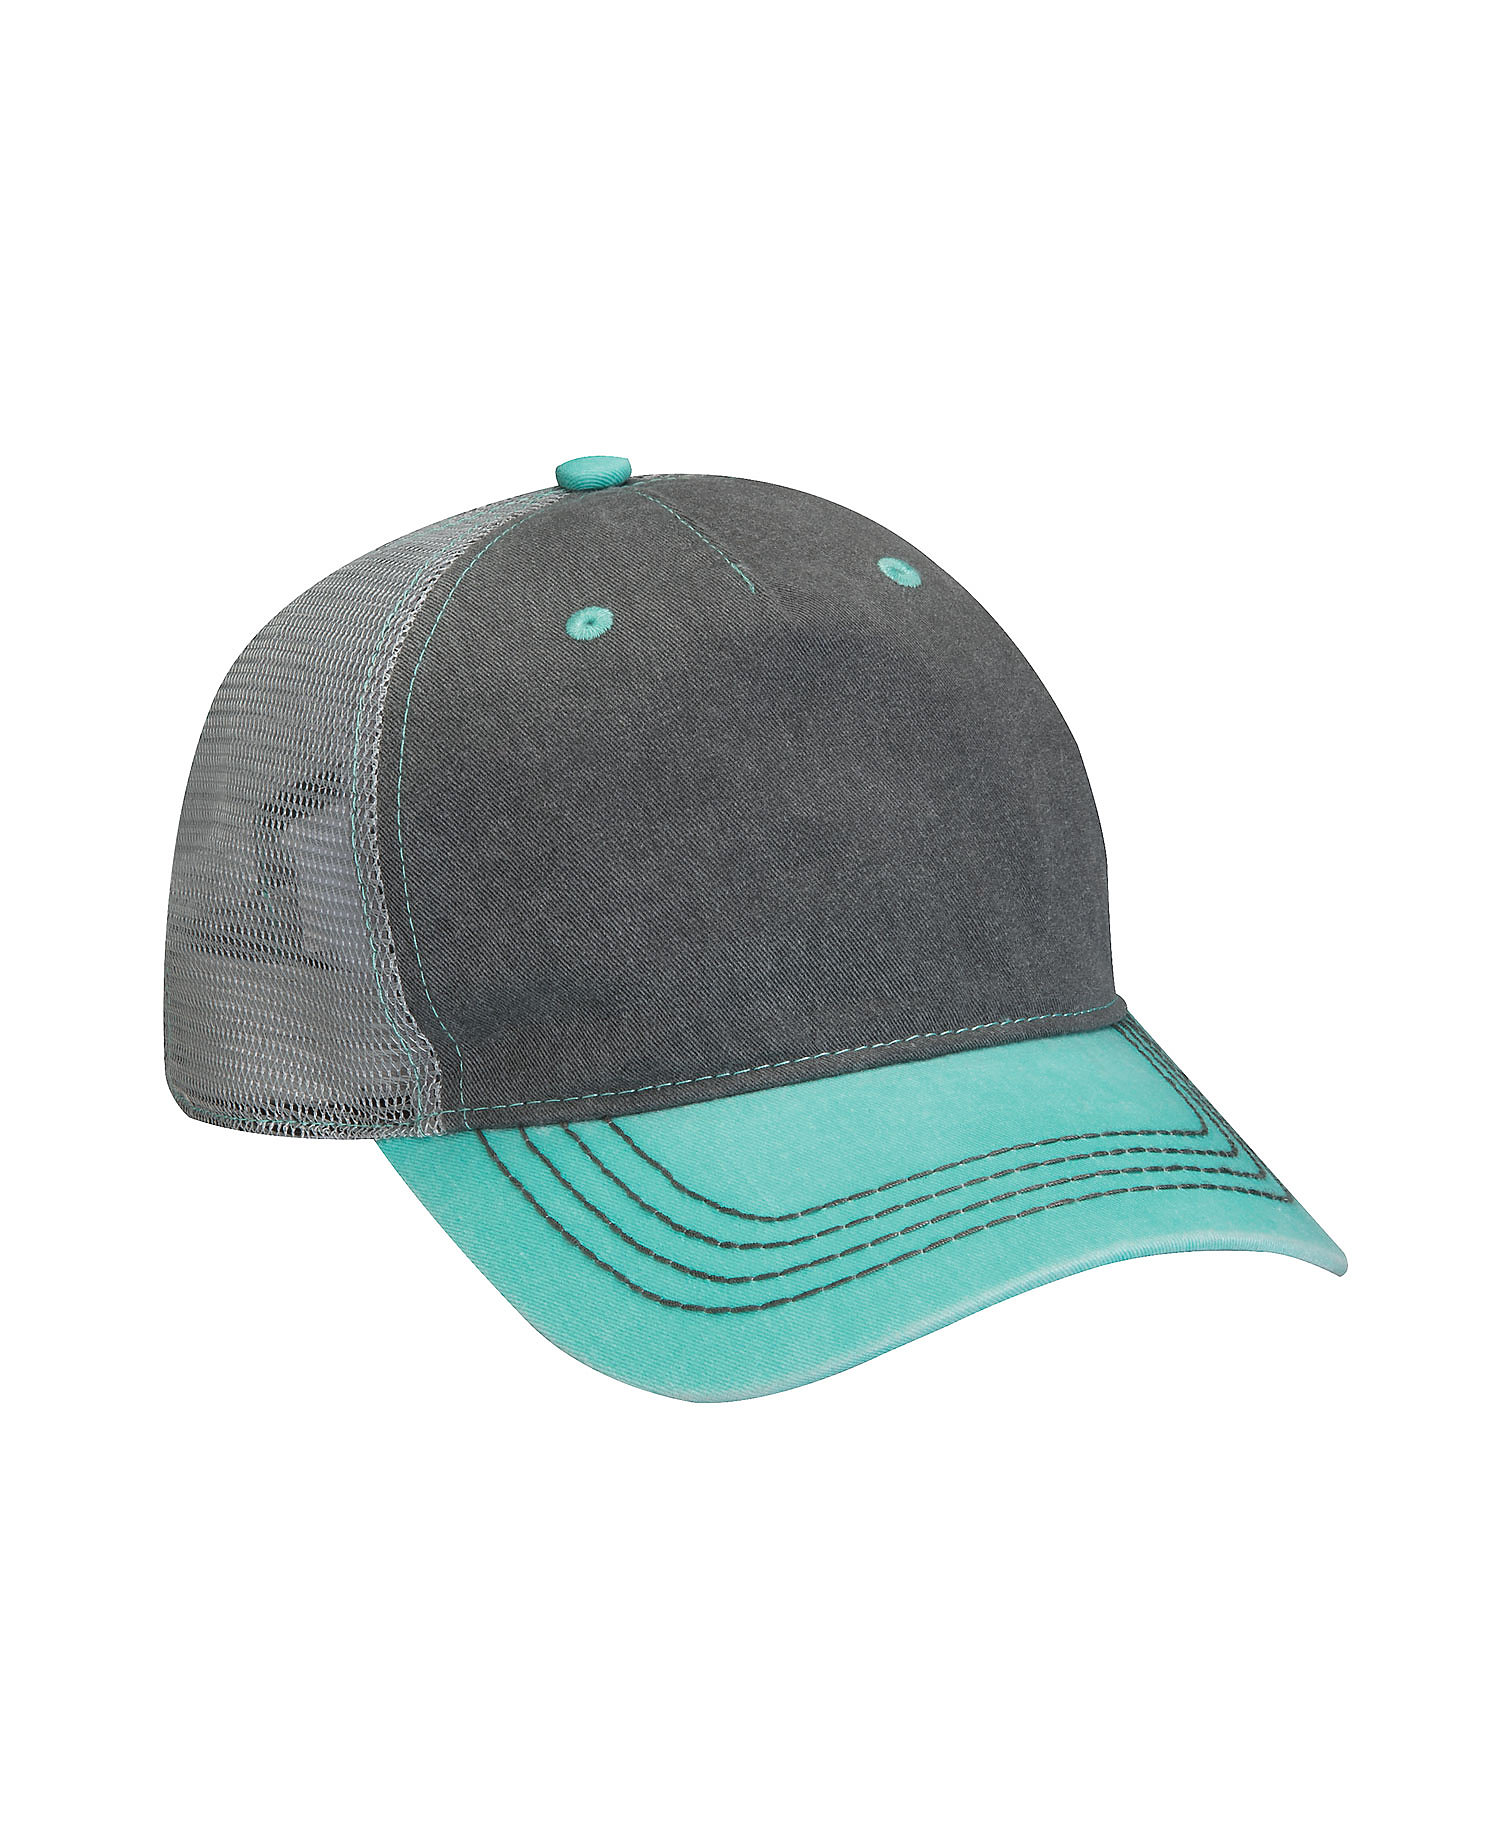 click to view Charcoal/ Seafoam/ Gray